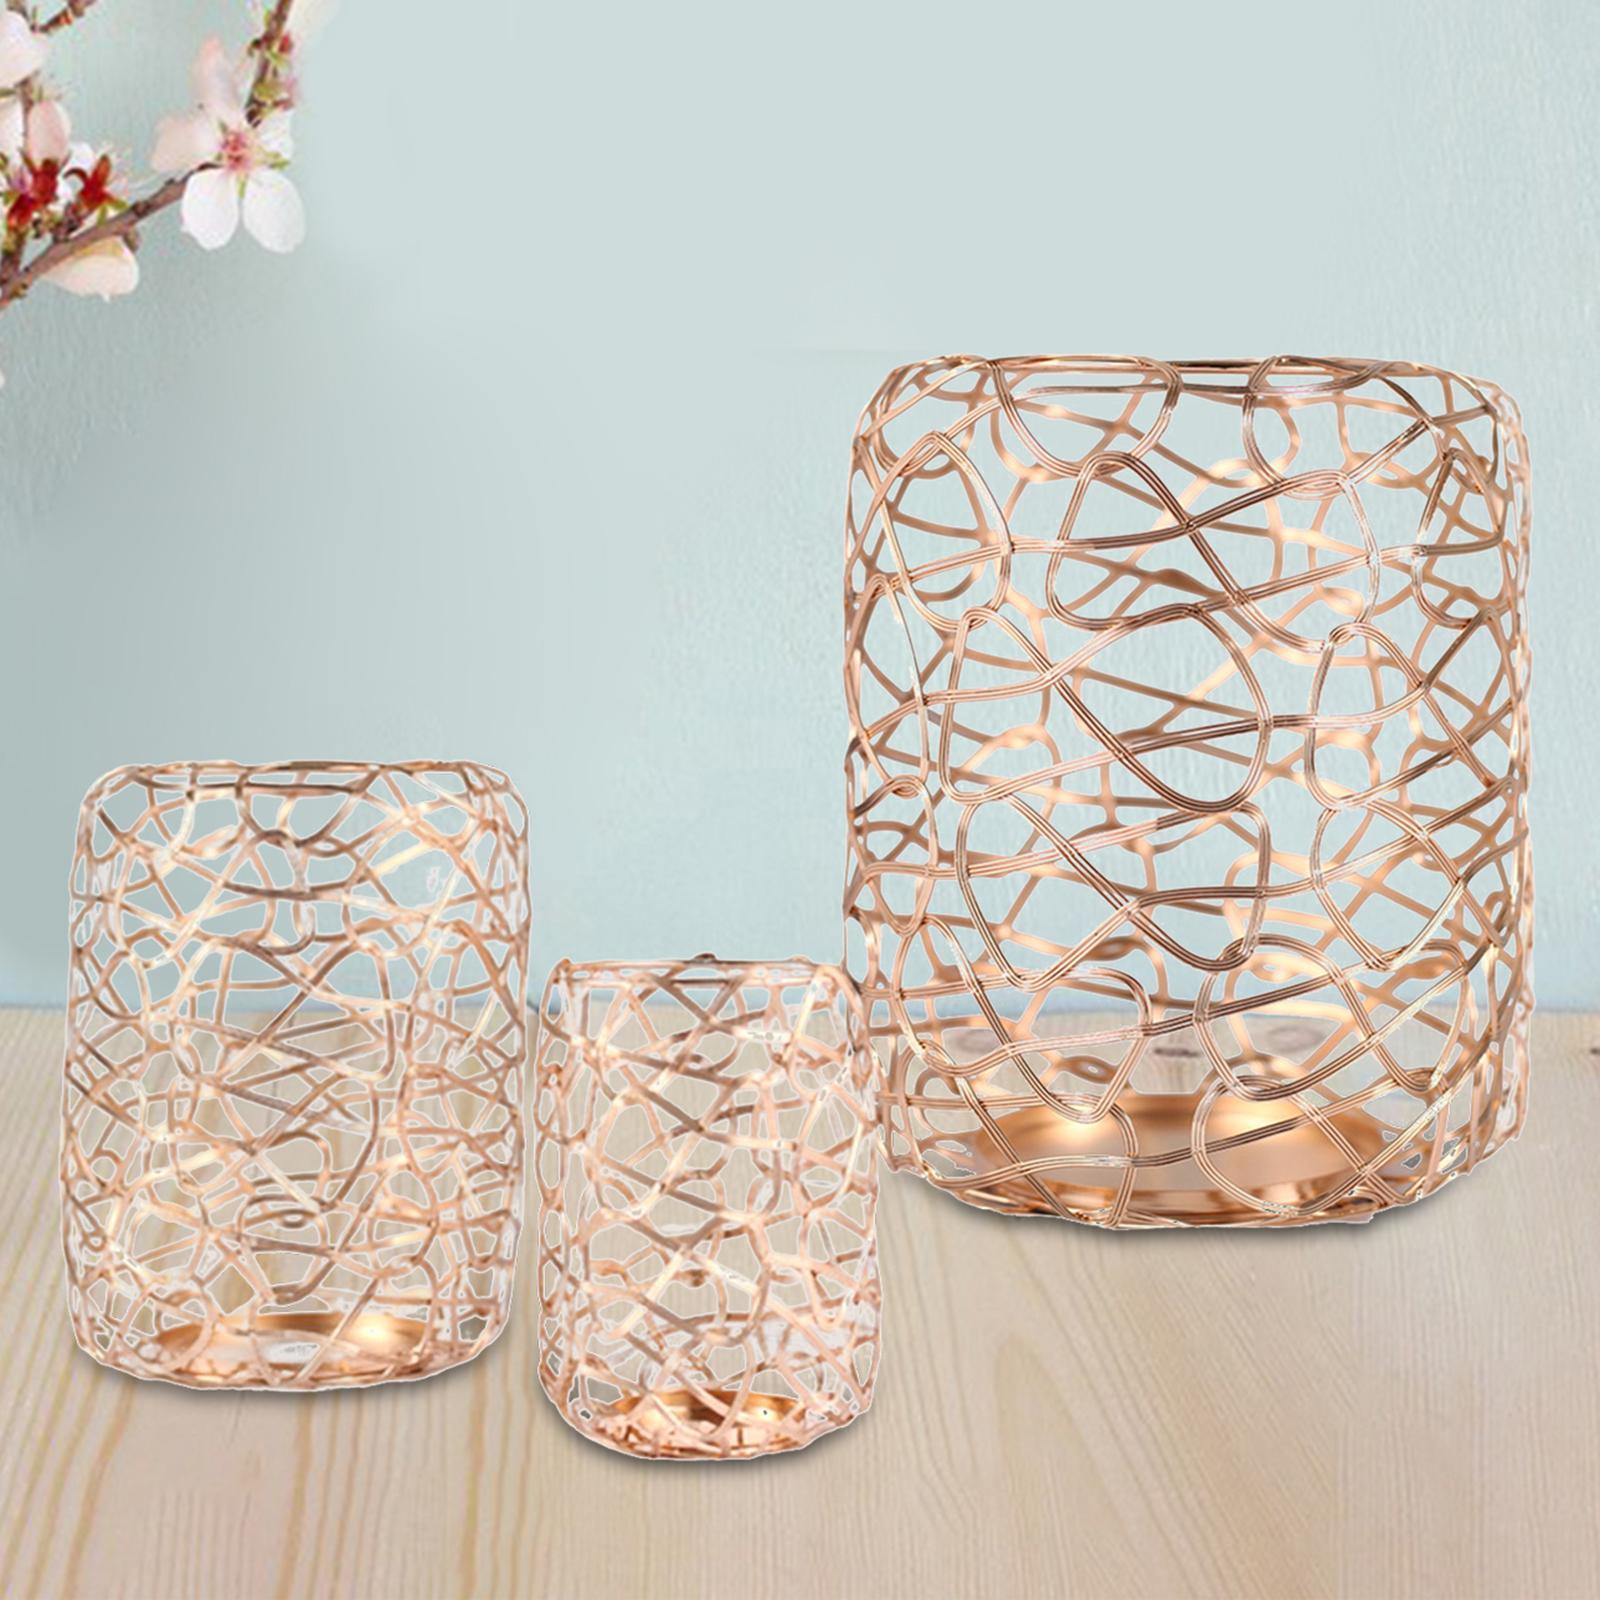 3Pcs Wire Candle Holder Ornaments Pillar Candleholder for Wedding Bedroom